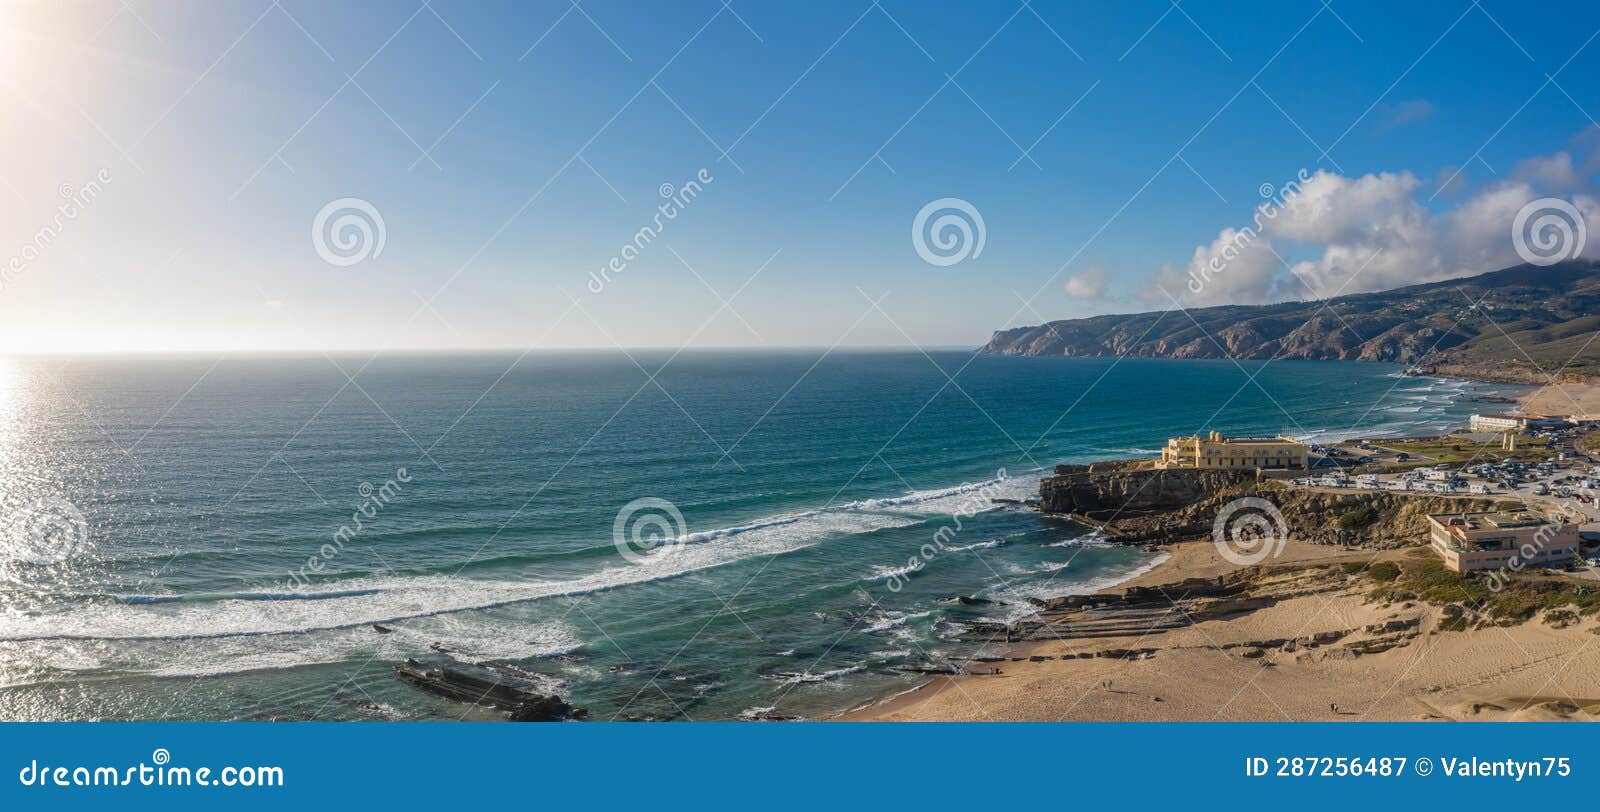 rocky and sandy coastlines of portugal ocean coast. aerial view of guincho beach